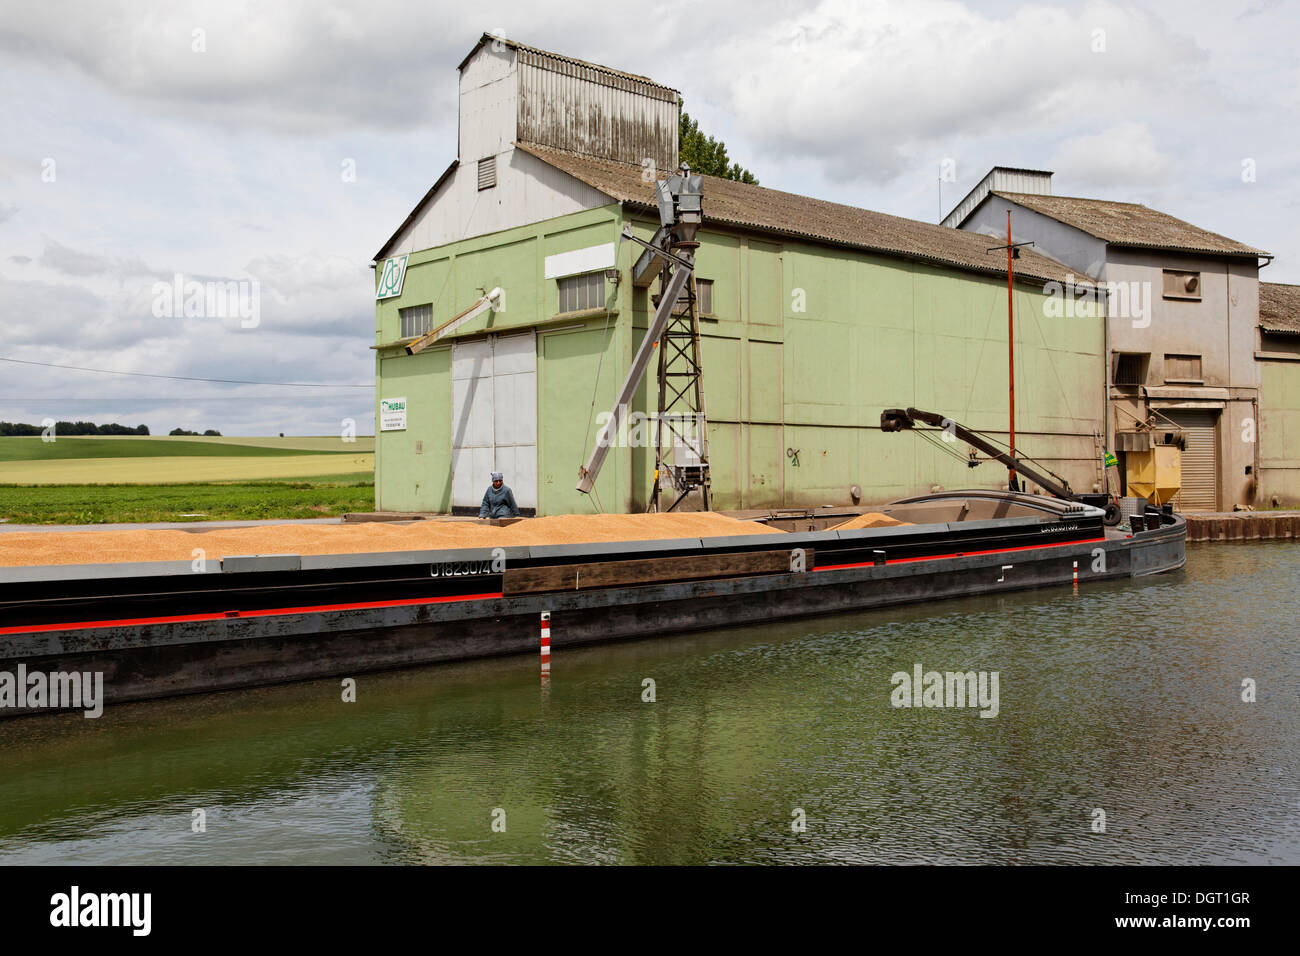 Canal of Saint-Quentin near Bellenglise, grain being loaded from a silo, Saint-Quentin, department of Aisne, Picardy region Stock Photo